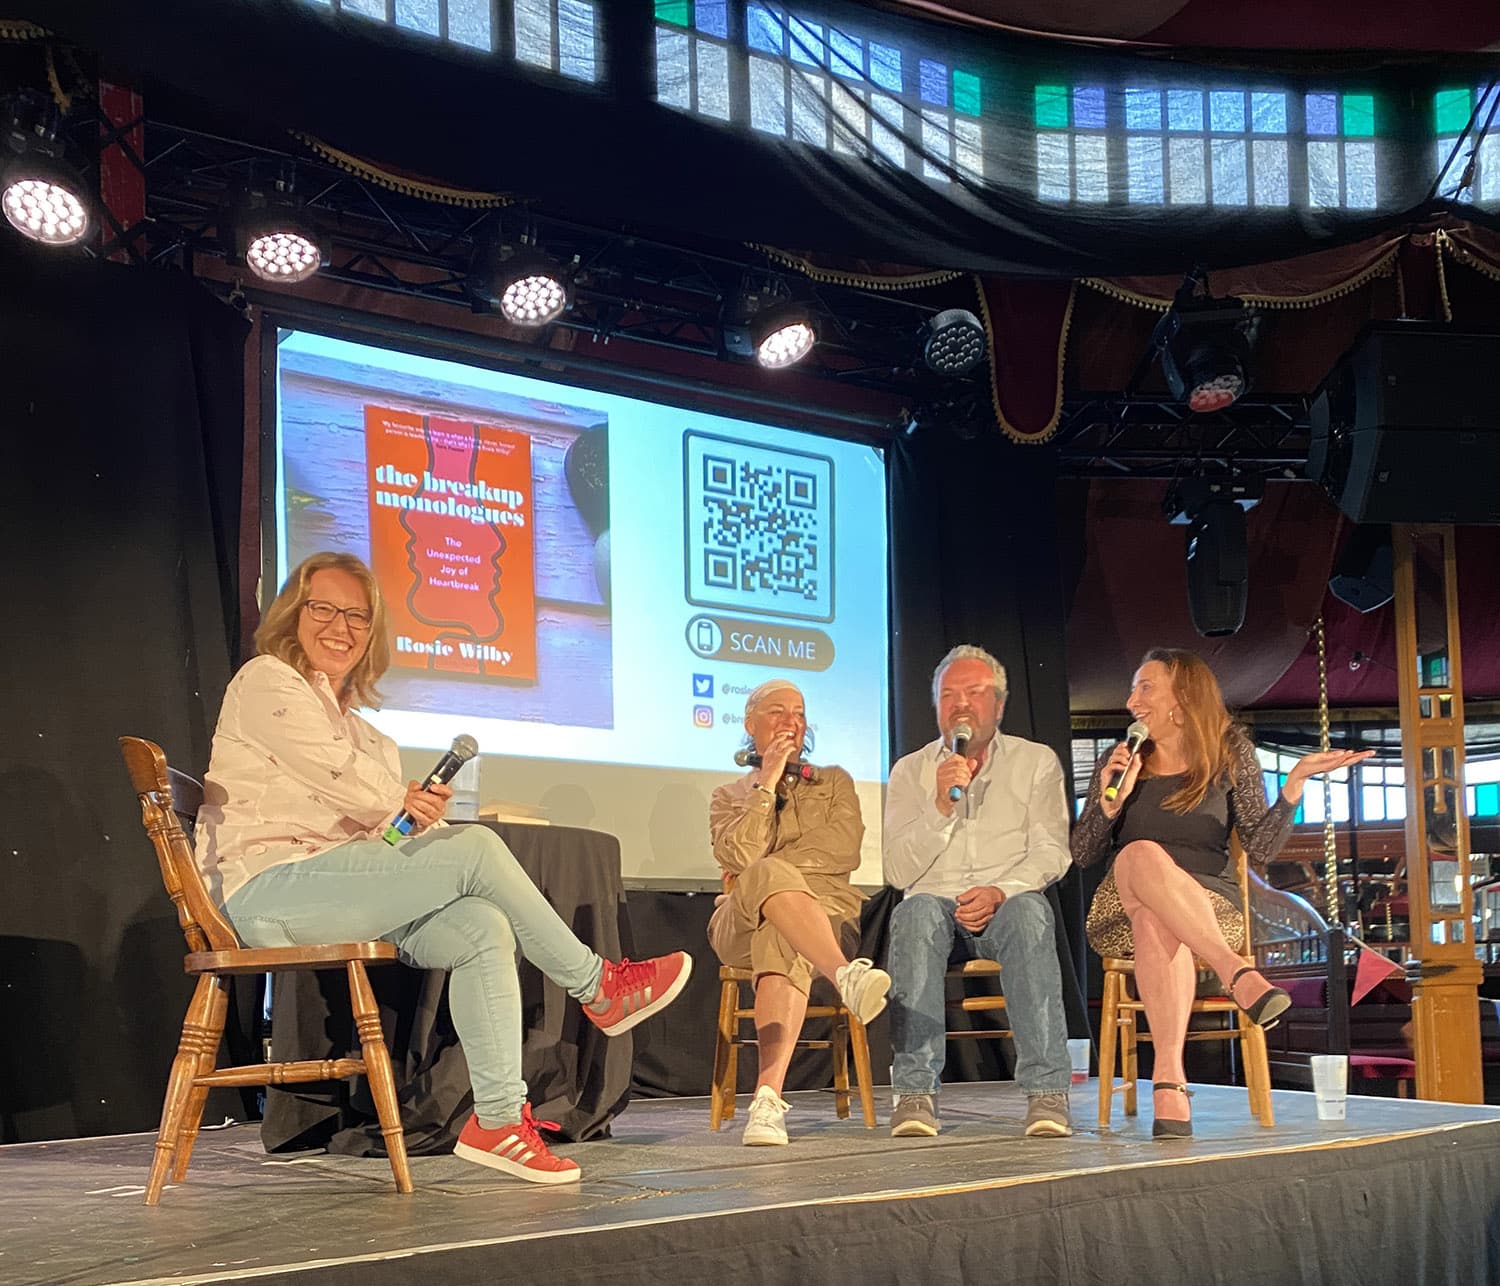 Rosie and guests recording The Breakup Monologues live at Brighton Spiegeltent